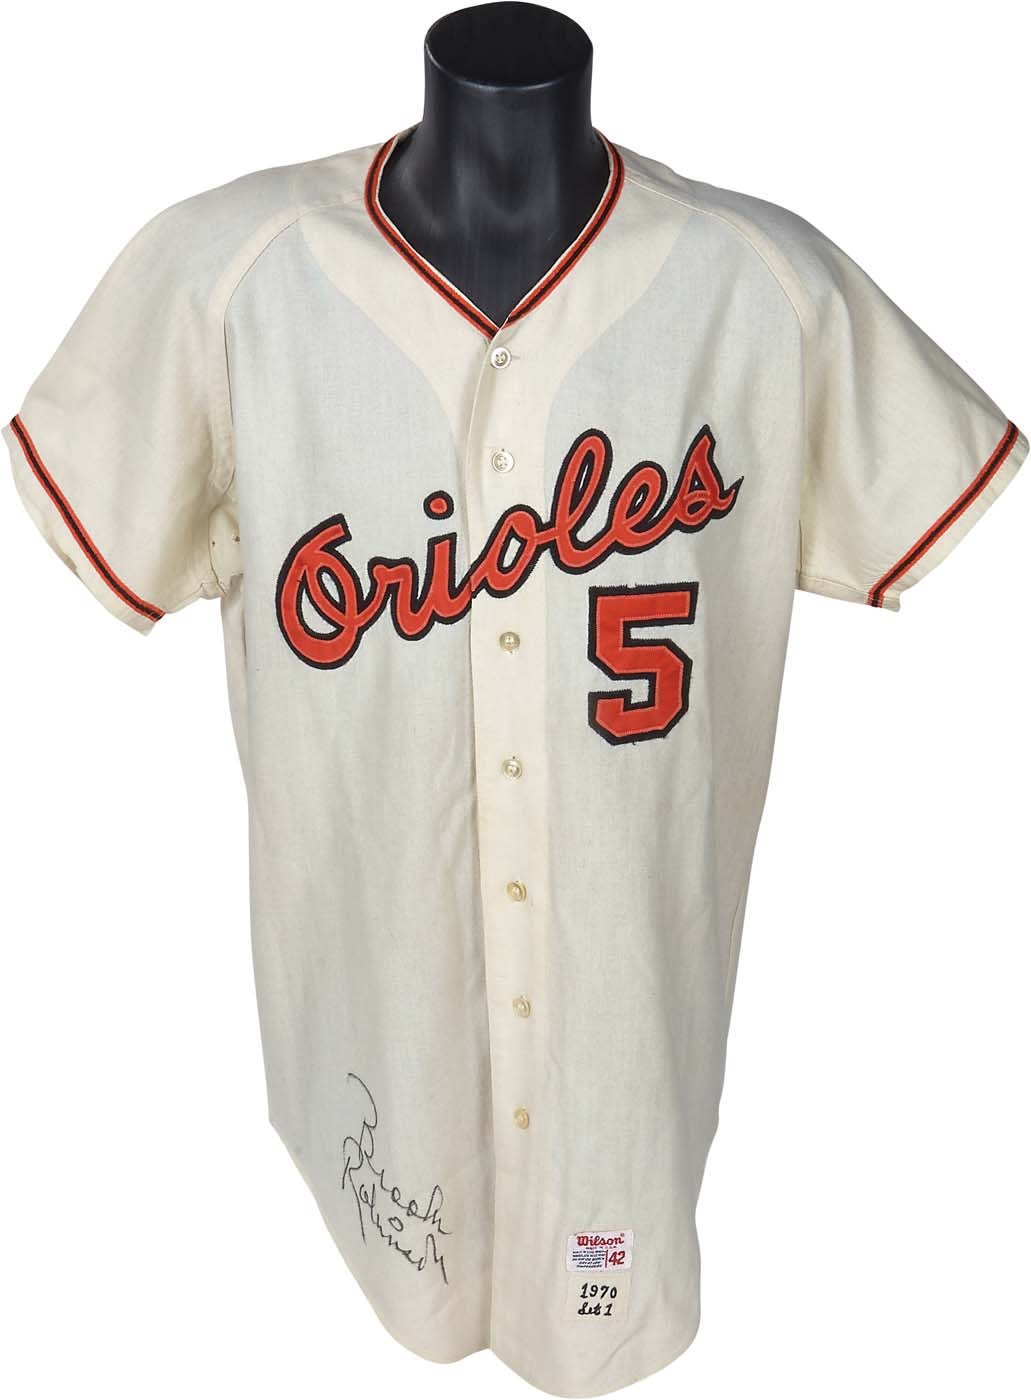 - 1970 World Series Brooks Robinson Baltimore Orioles Game Worn Jersey - Photo-Matched (MEARS 10)